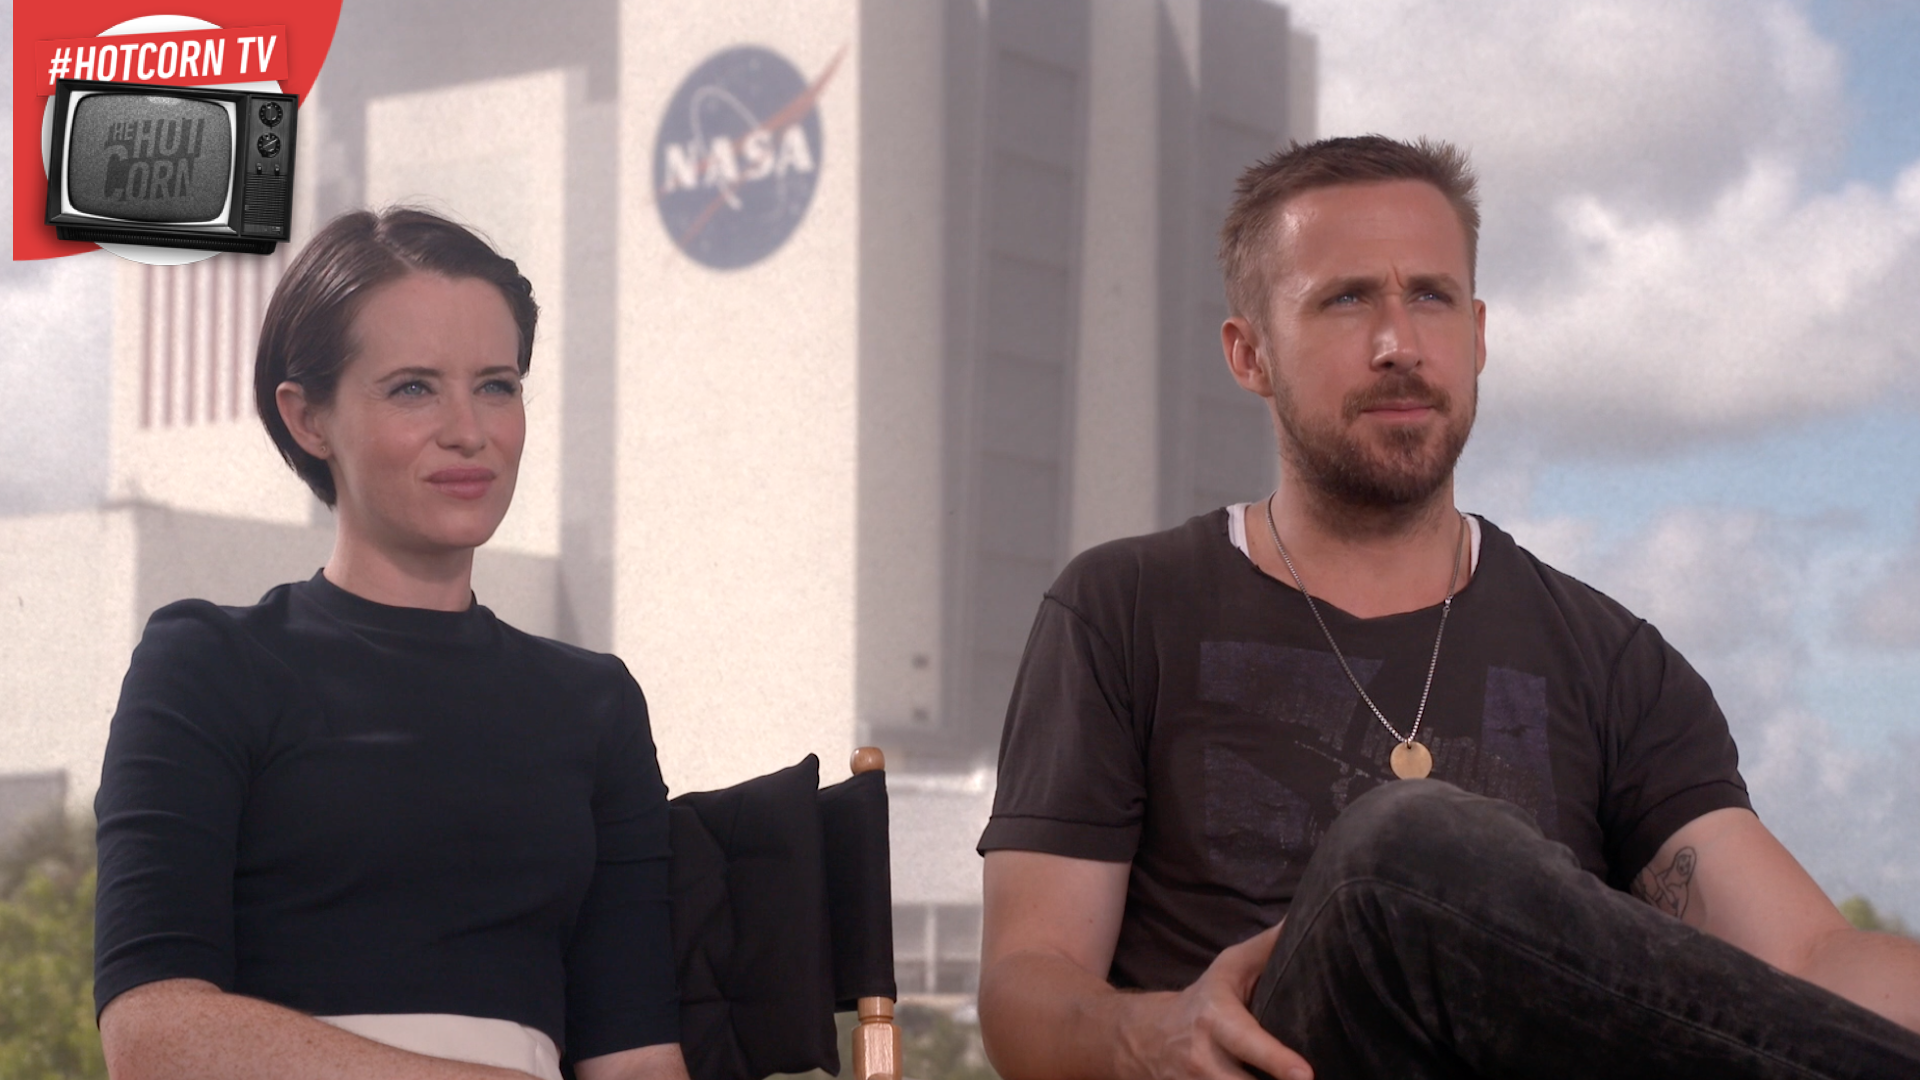 HOT CORN TV - Ryan Gosling and Claire Foy at Kennedy Space Center – The HotCorn1920 x 1080